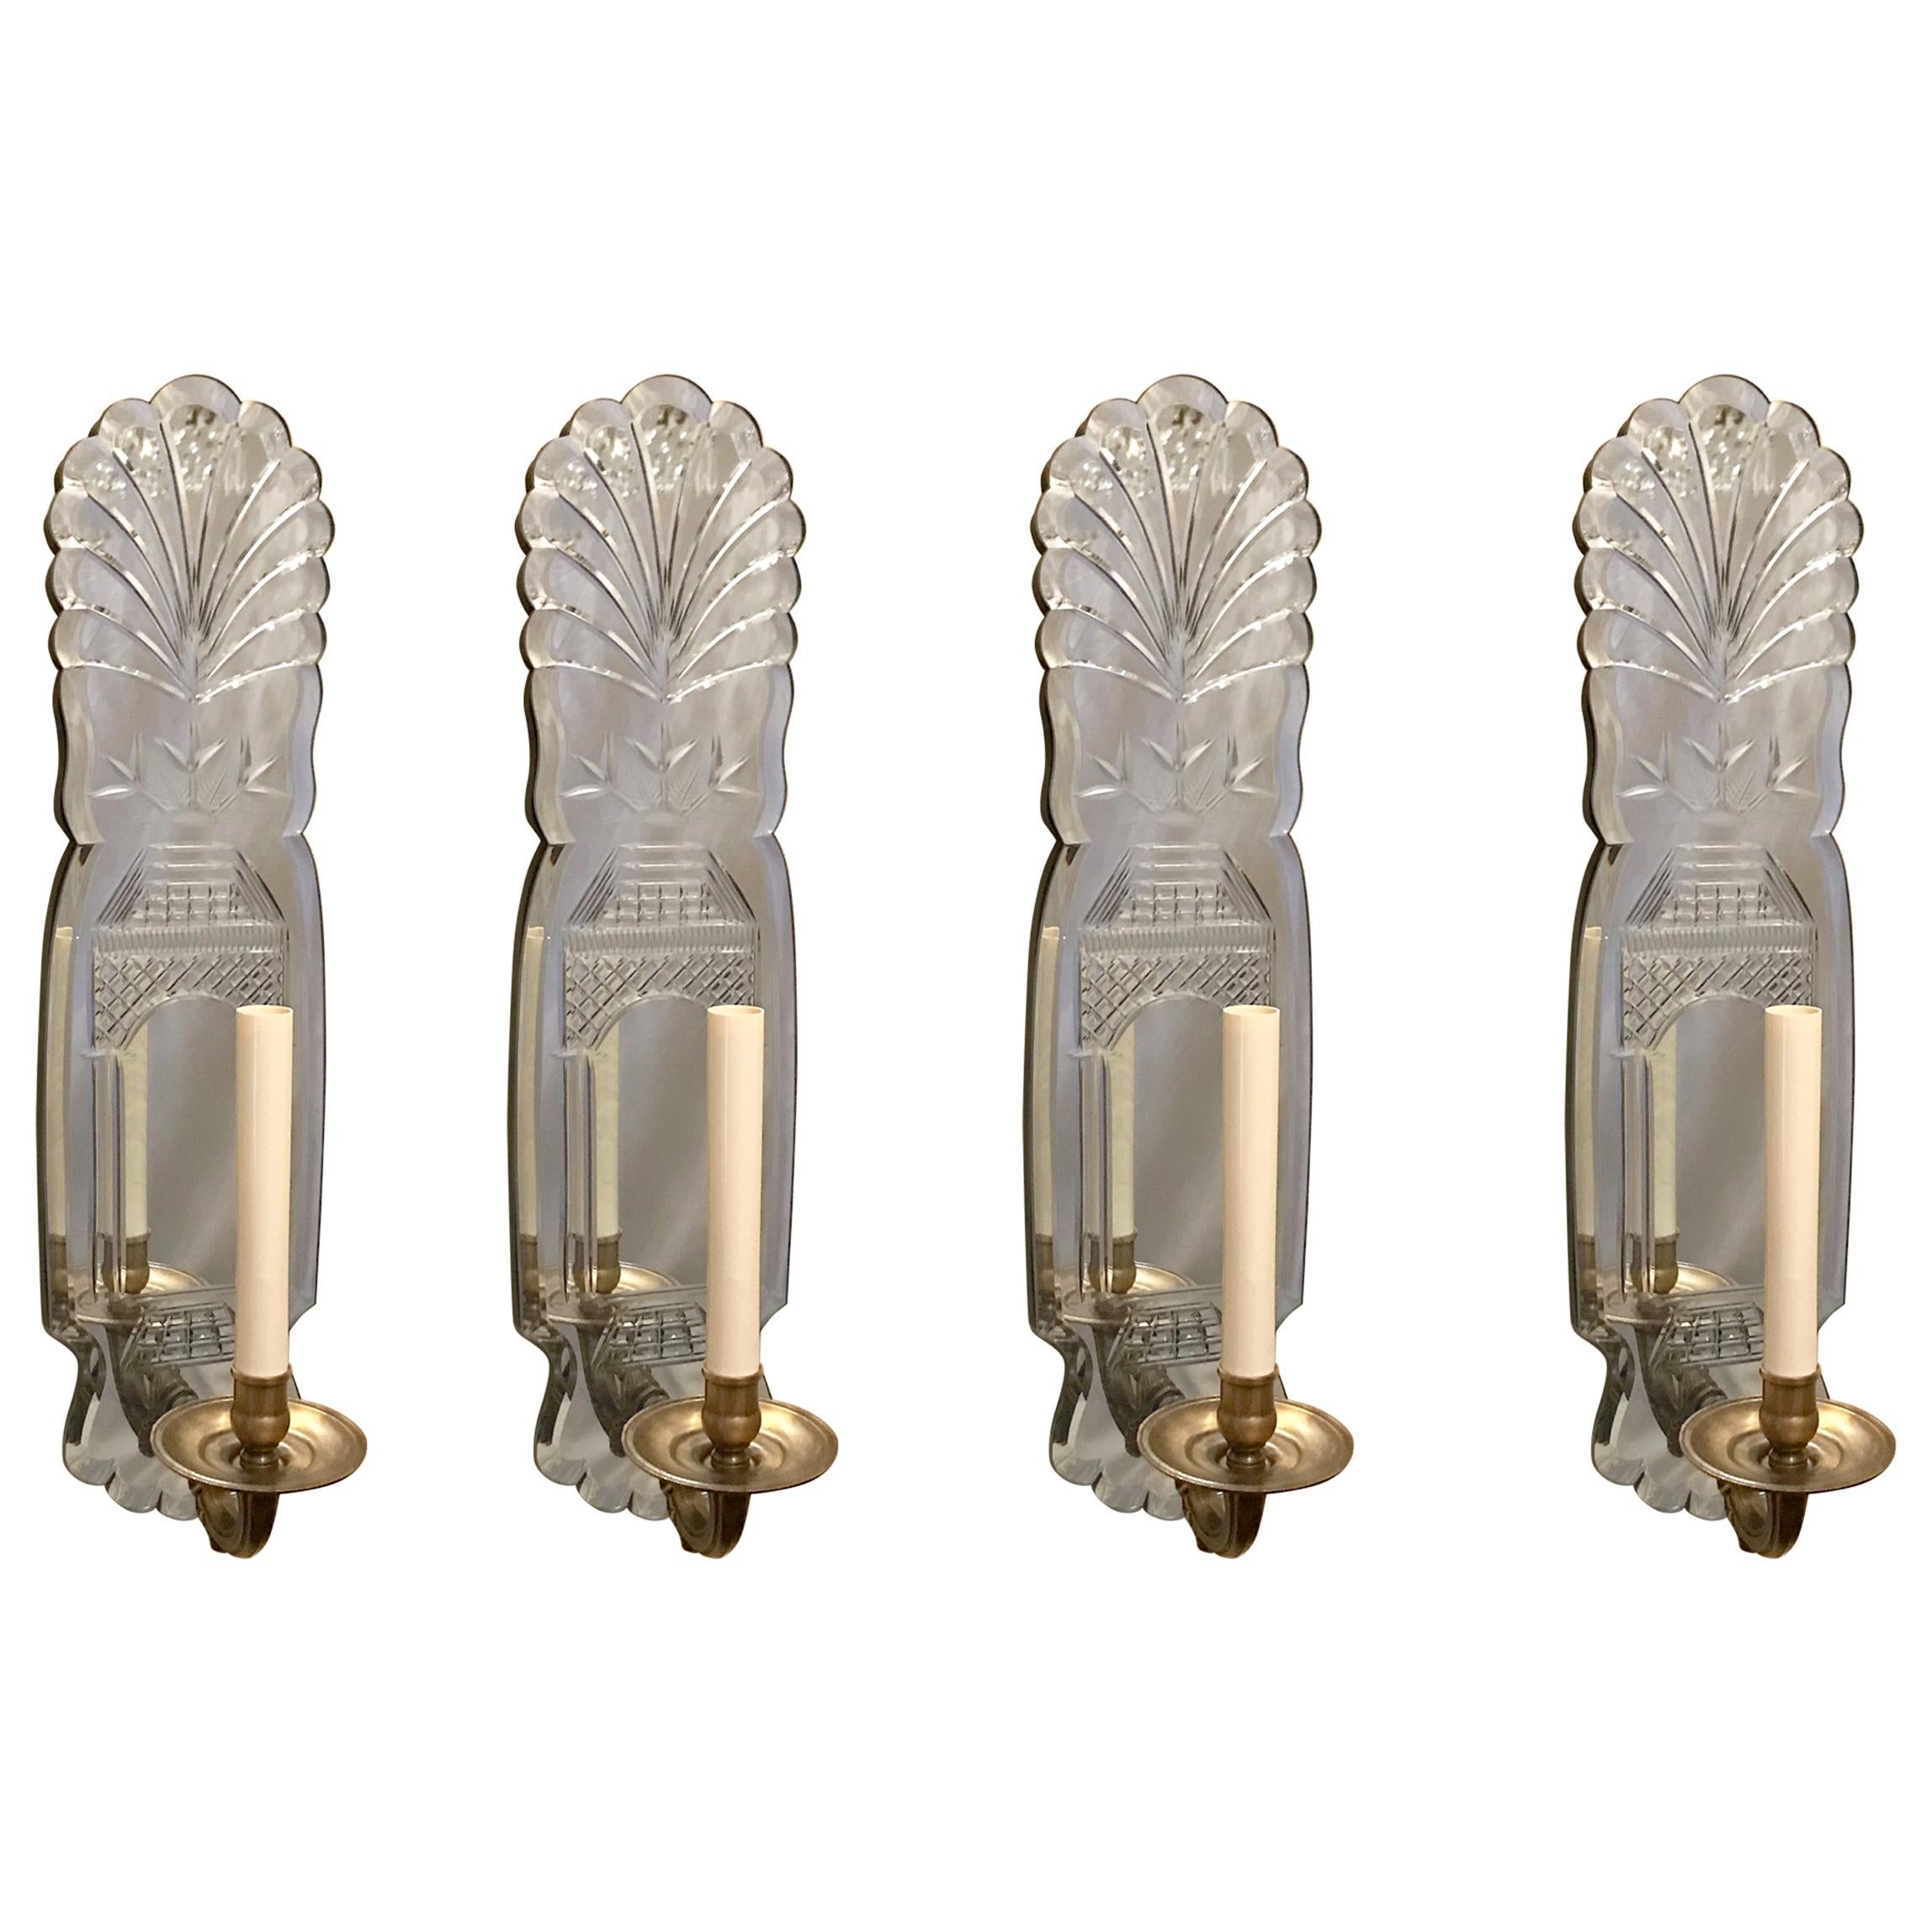 Wonderful Pair Mirrored Back Etched Bronze Candelabra Wall Sconces